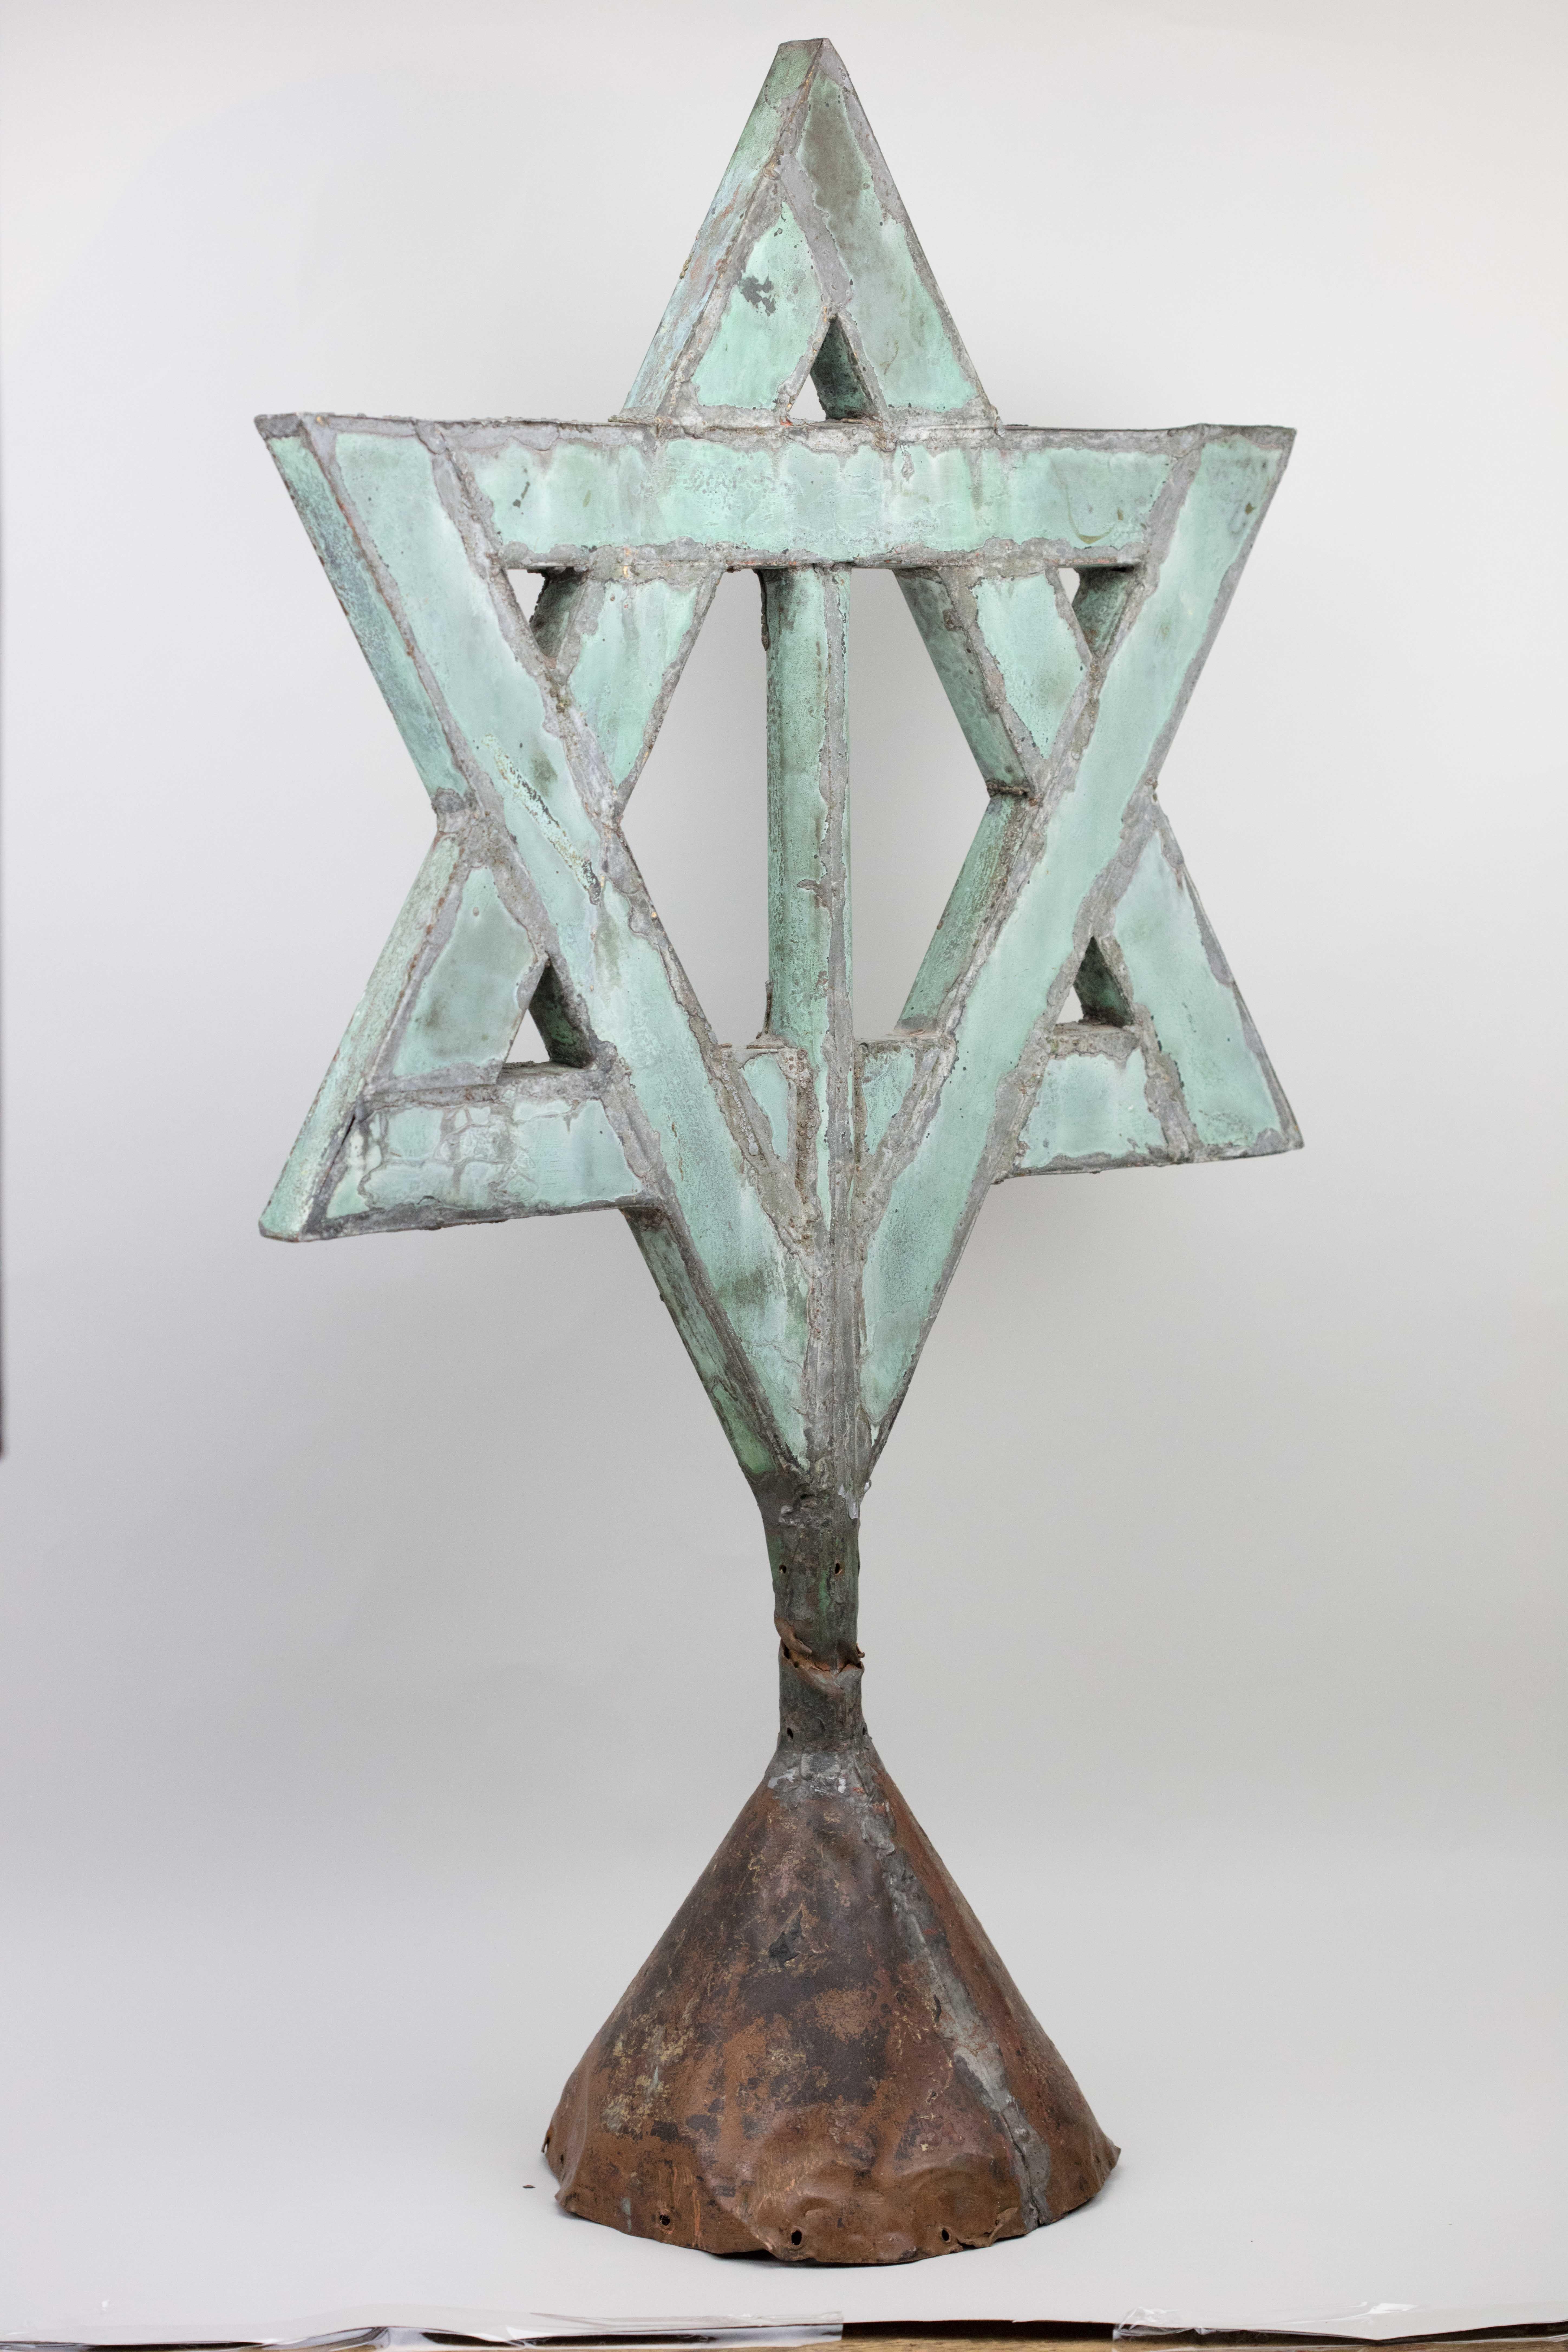 Handmade copper synagogue roof-top finial, USA, circa 1880.
Folk Art, Americana, New England Hammered and soldered copper architectural finial in form of a Star of David.
Bearing beautiful hundred years green patina.

Every item in Menorah Galleries